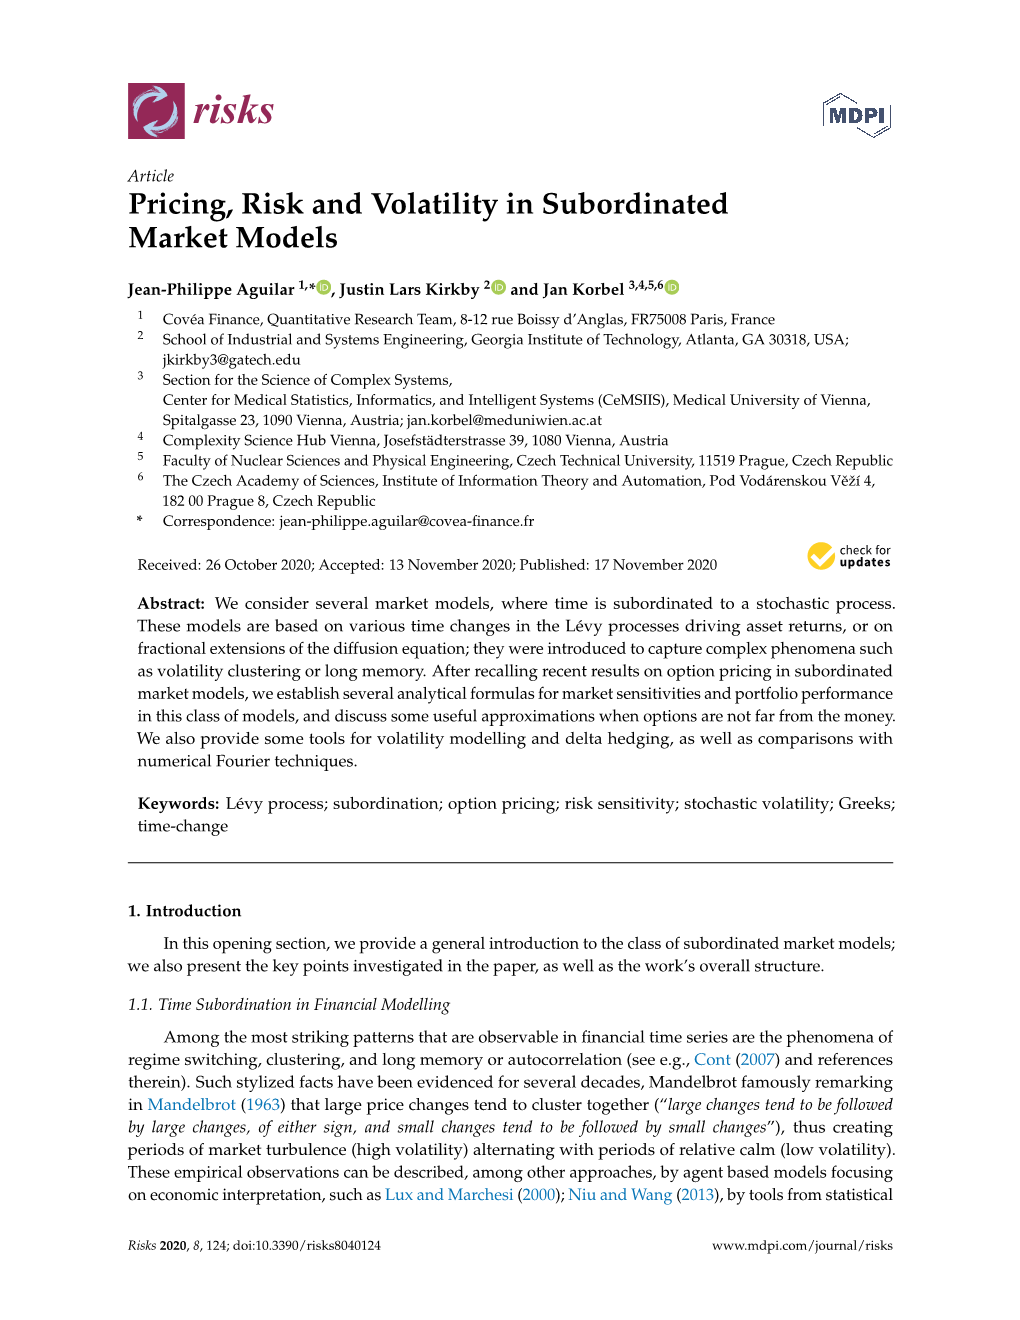 Pricing, Risk and Volatility in Subordinated Market Models